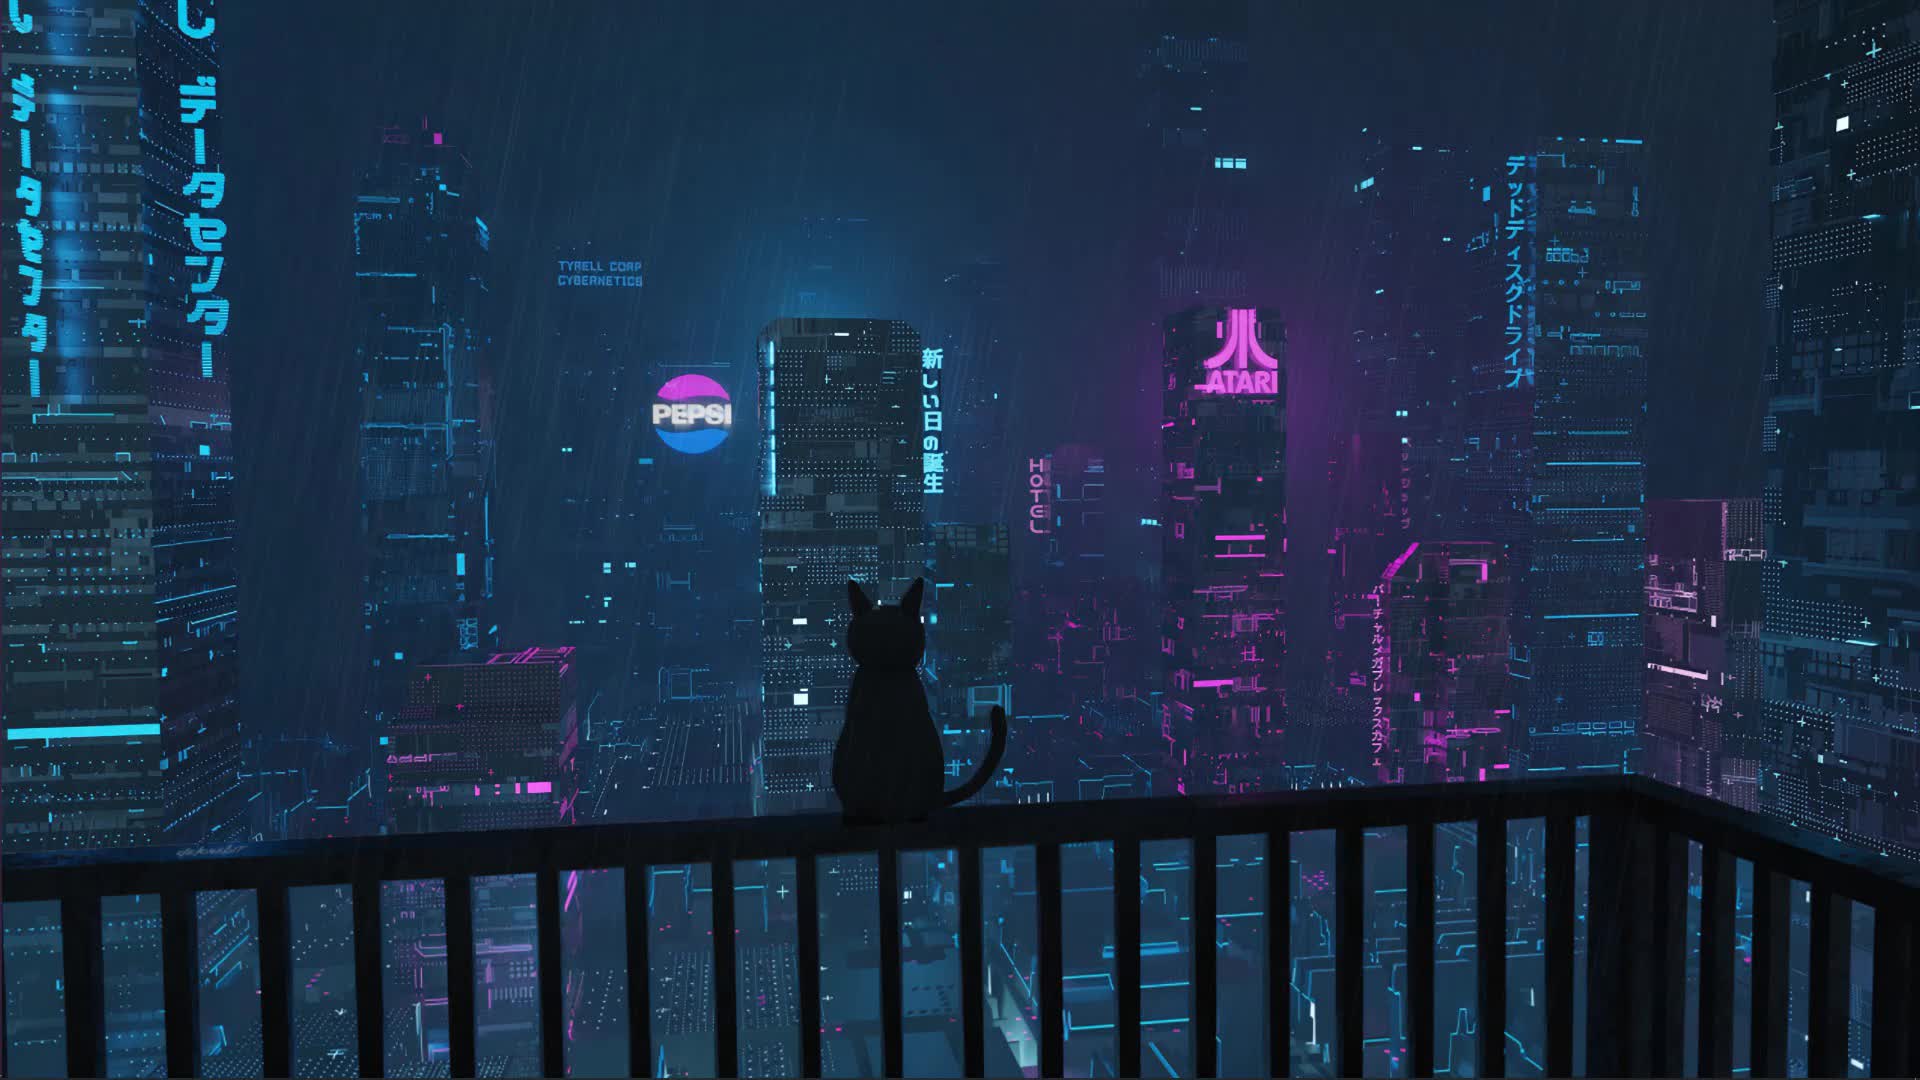 Rain In Japan City With Black Cat Live Wallpaper HD: Free HD 4K Live Wallpaper For Windows & MacOS